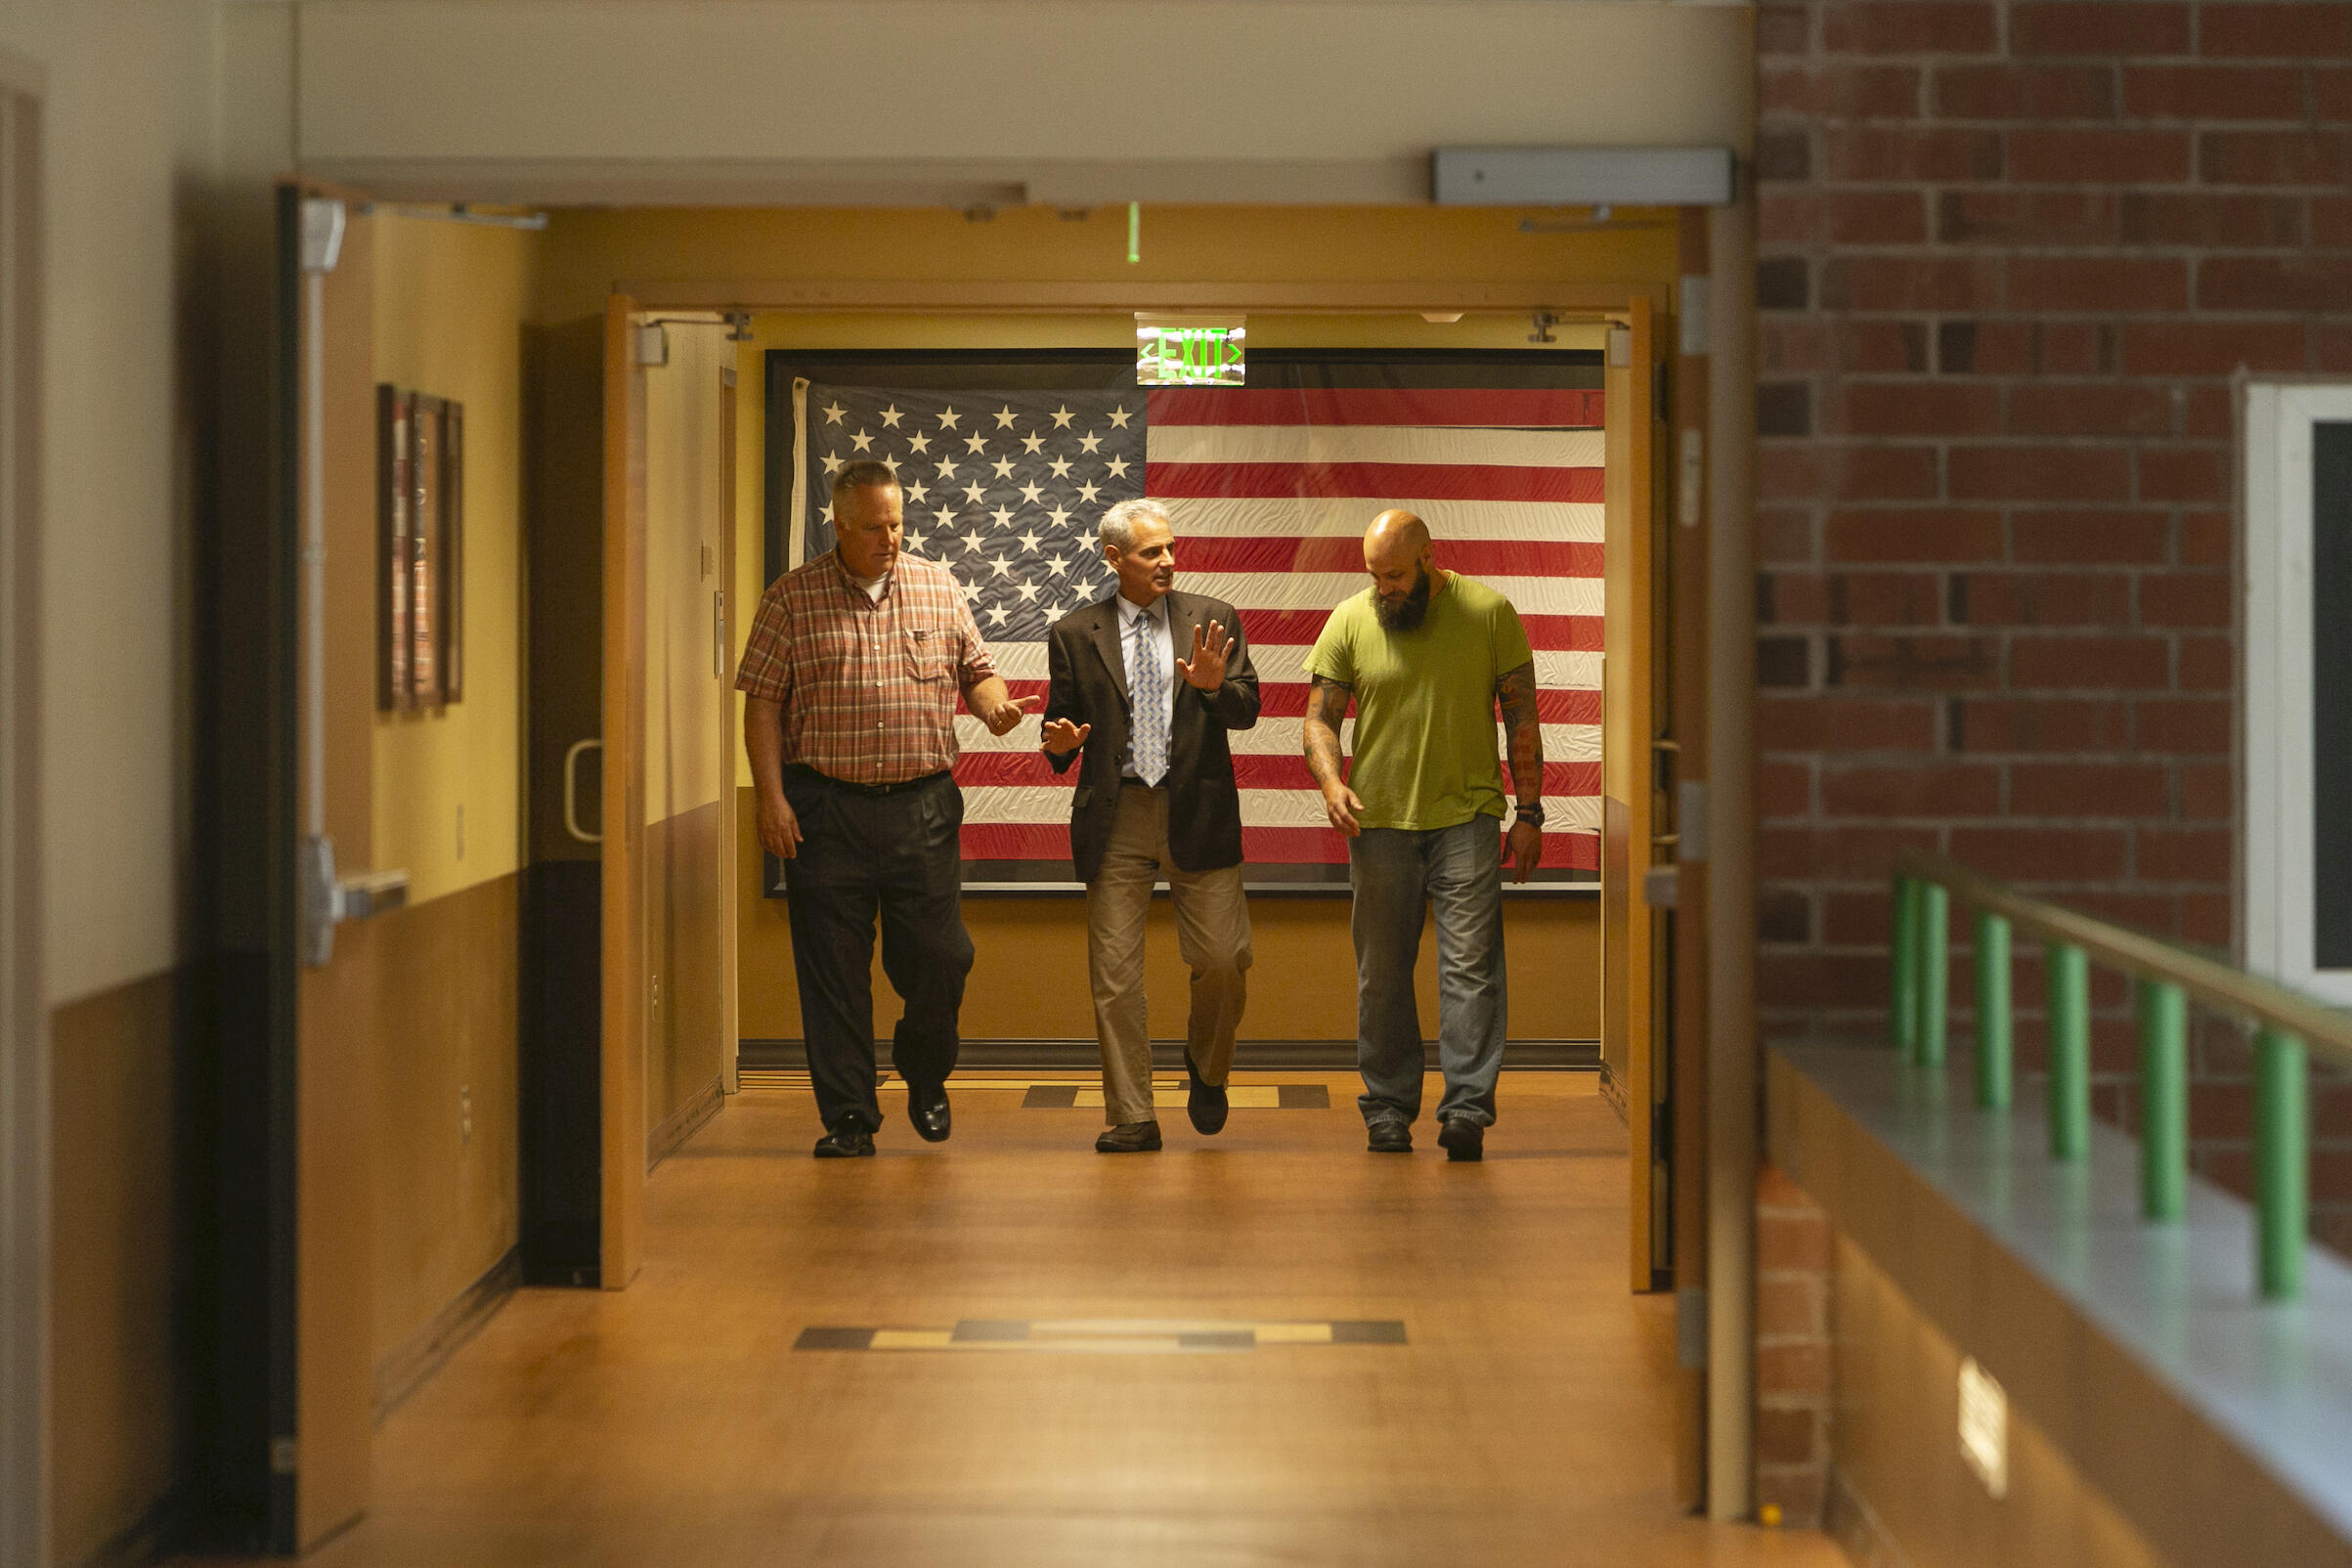 Three people walk down the corridor of a hospital. The flag of the United States is displayed behind them.